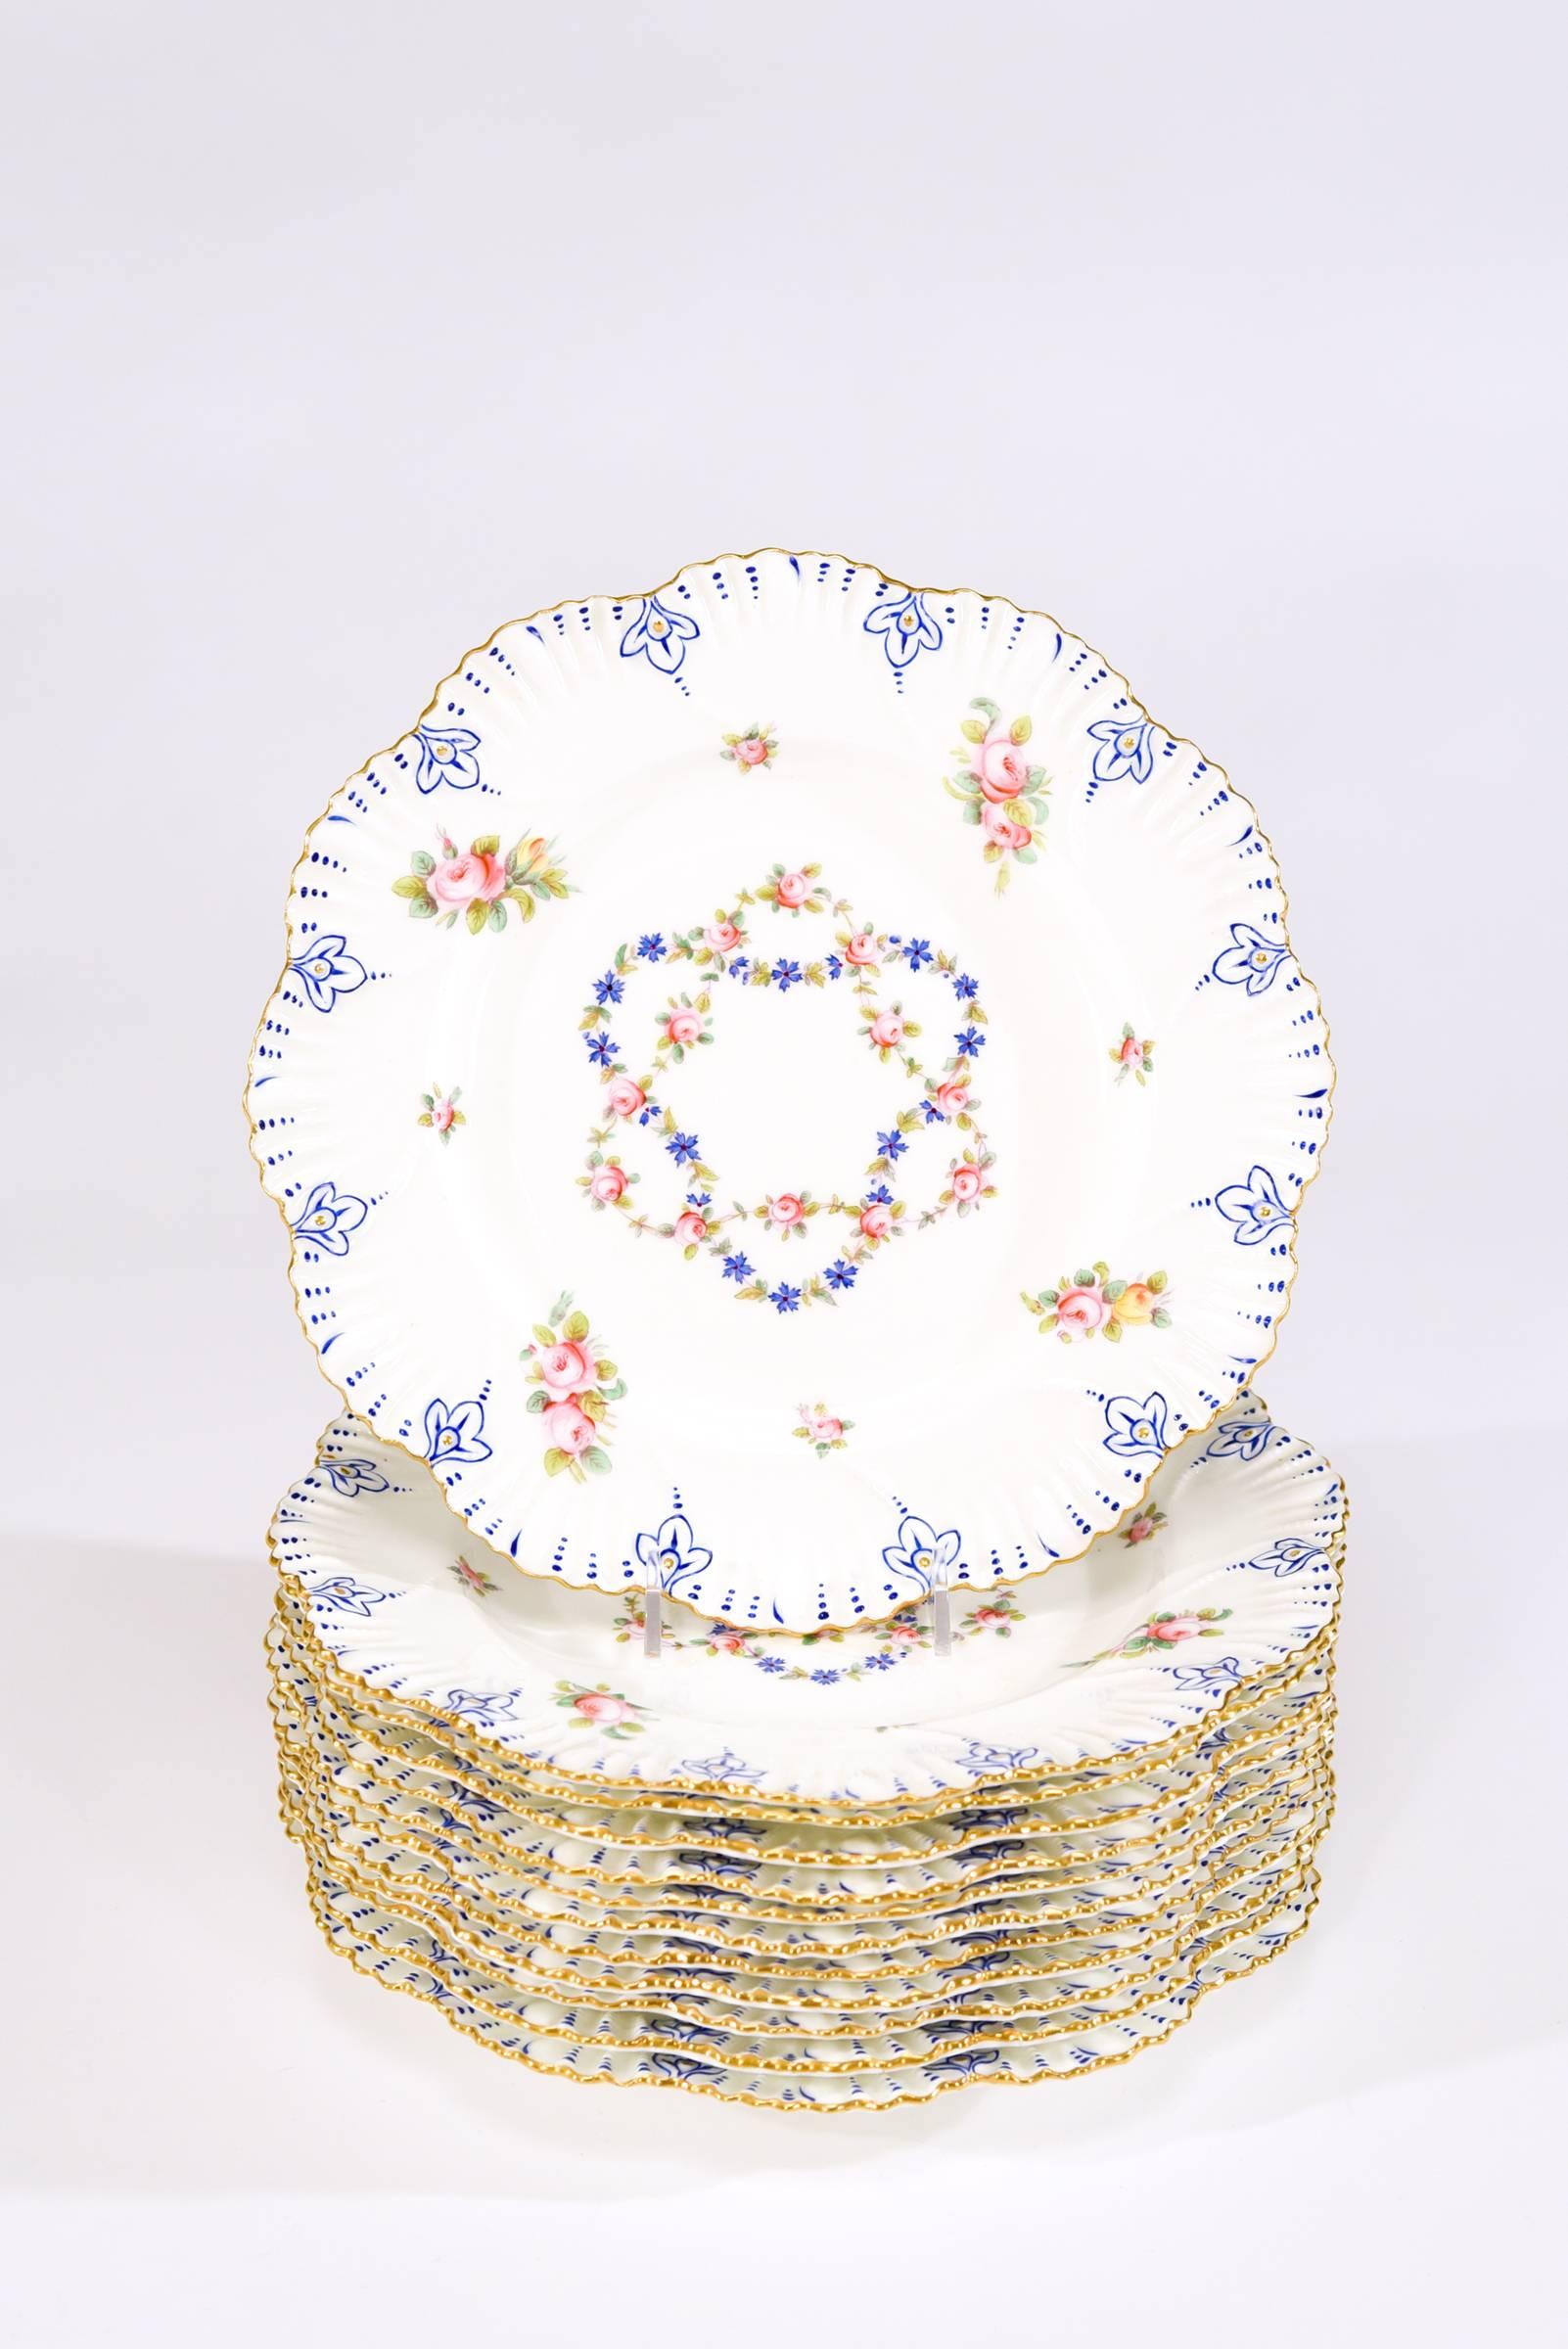 This set of 12 dinner plates were made by Coalport in 1889 and retailed by Gilman Collamore, New York. Evoking the colors and style of Sevres porcelain, they have shaped rims with molded relief and trimmed in gold. Hand-painted roses and